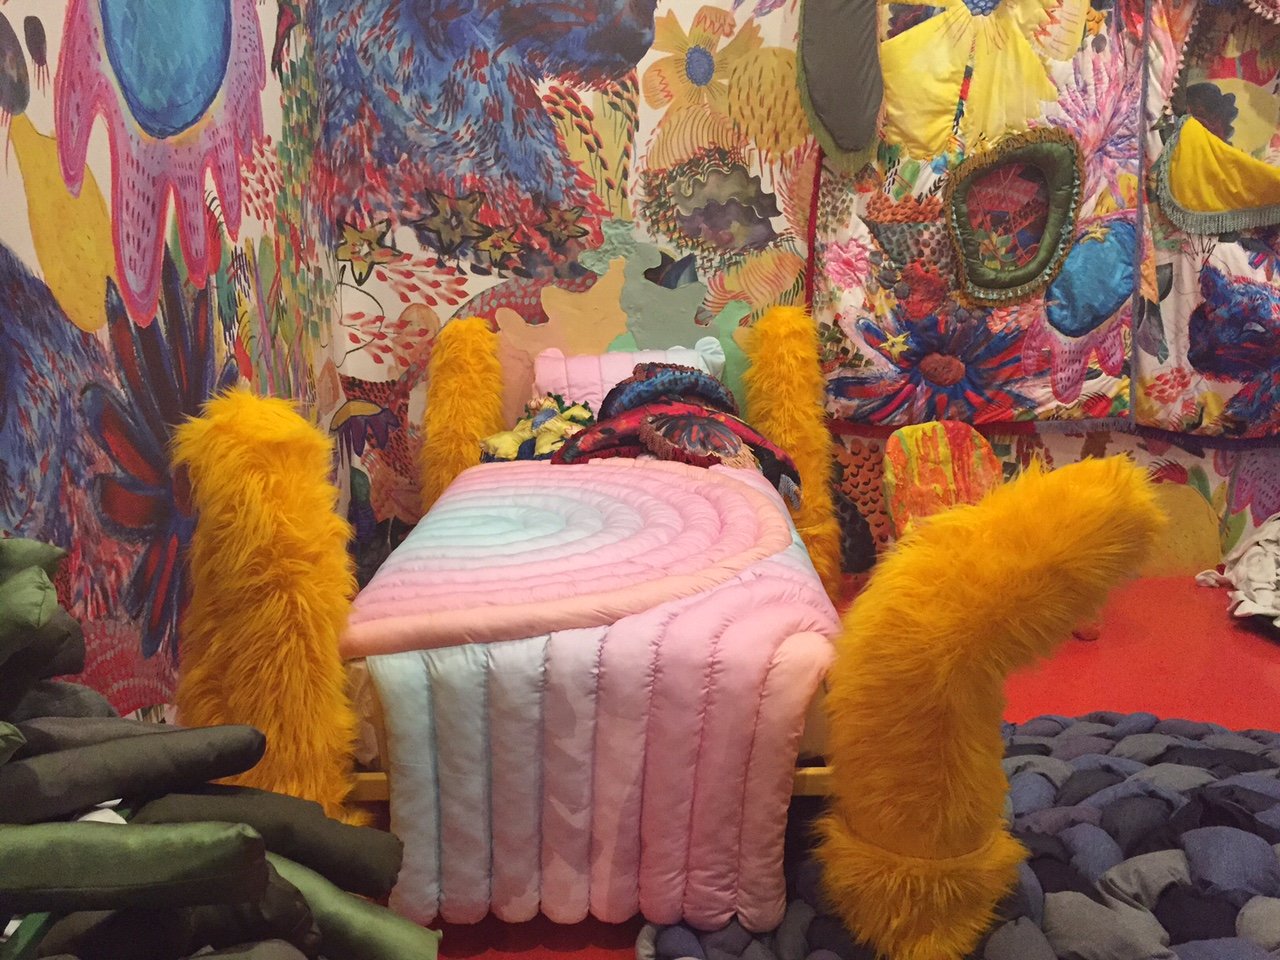 Katie Stout, "Bedroom Curio" presented by Gallery Diet and Cultured magazine. Photo: Cait Munro